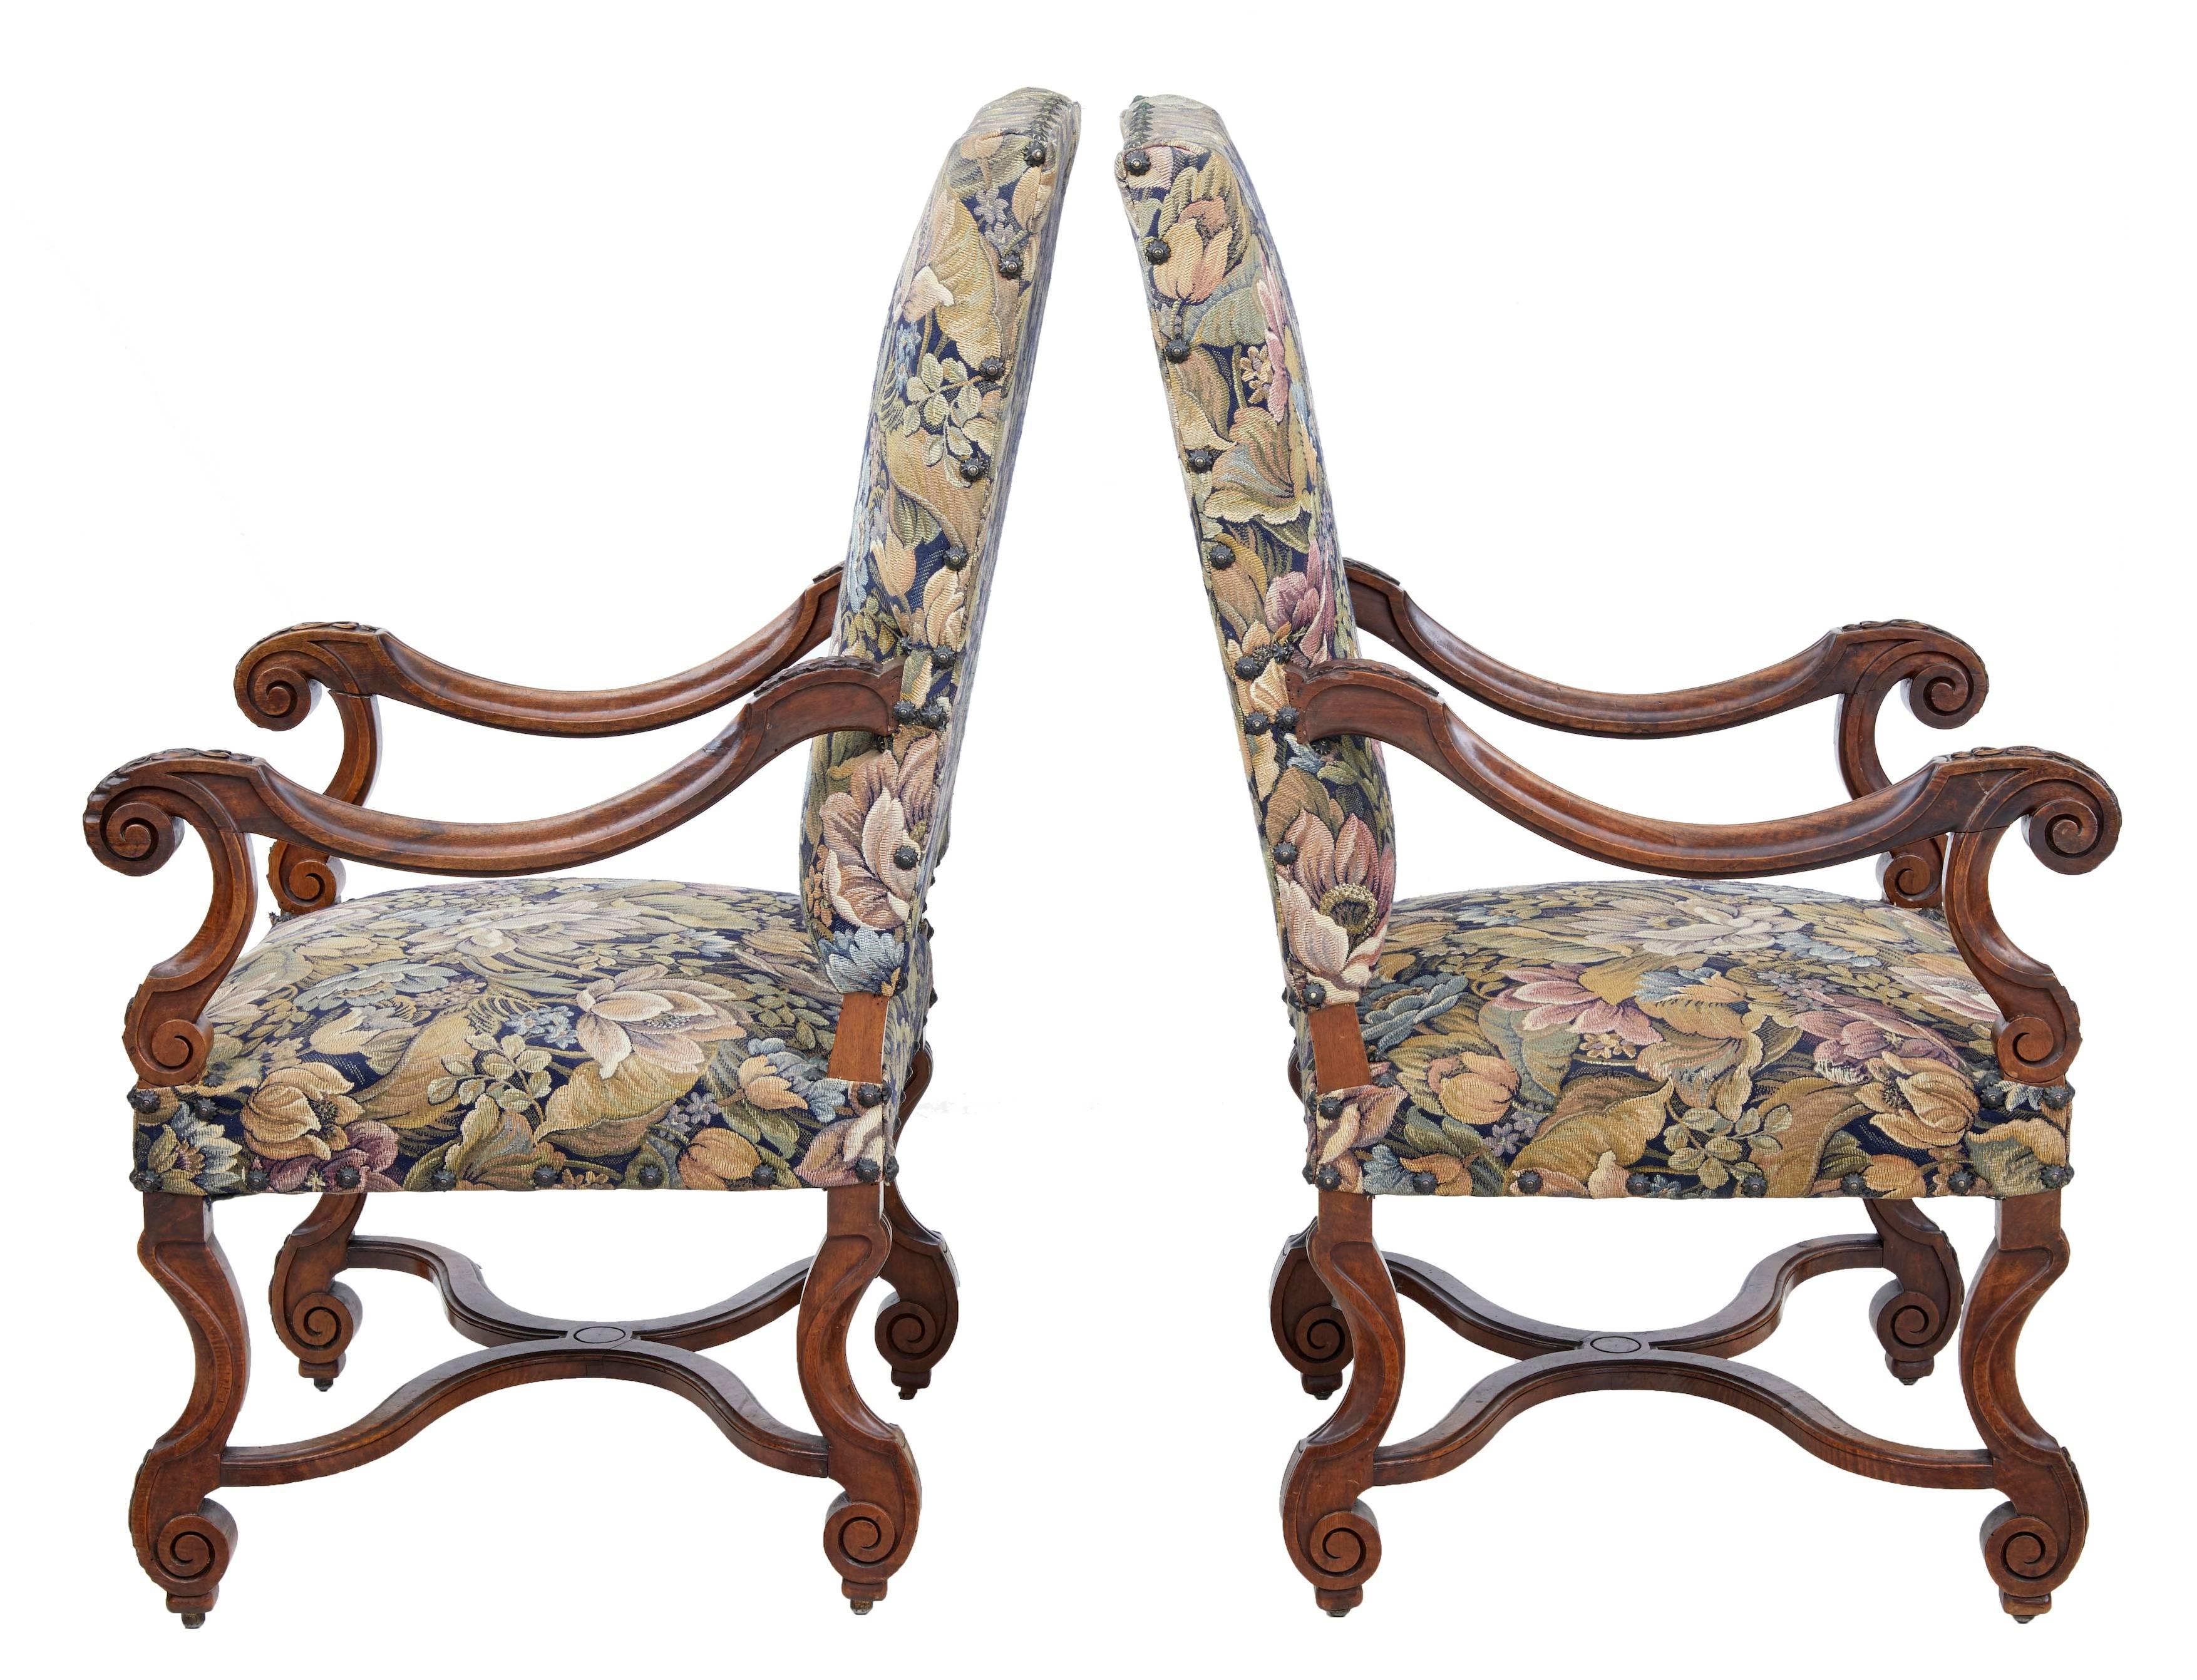 Fine pair of armchairs, circa 1890.
Richly upholstered in original tapestry covering.
Carved walnut scrolling arms, adorned with acanthus leaves. Standing on similar legs, united by stretcher and standing on small ball castors.
Missing one stud